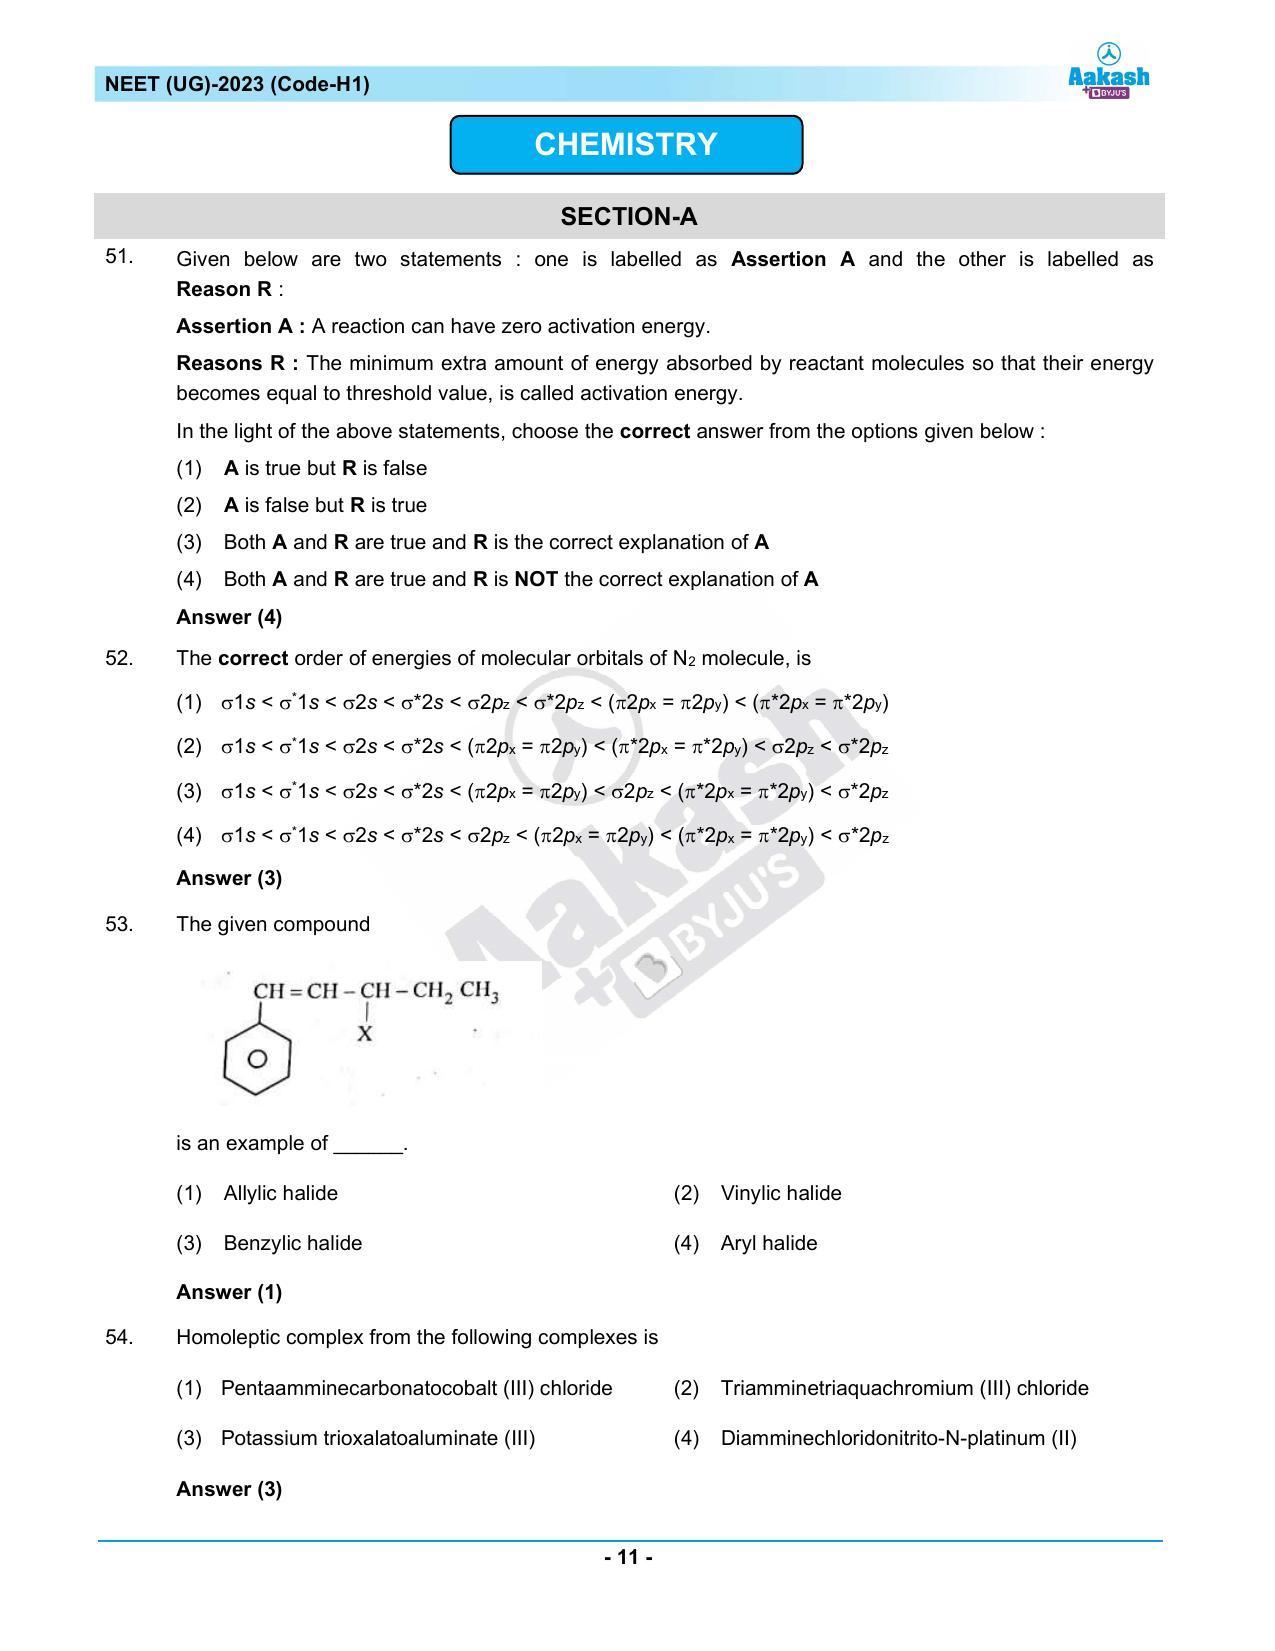 NEET 2023 Question Paper H1 - Page 11